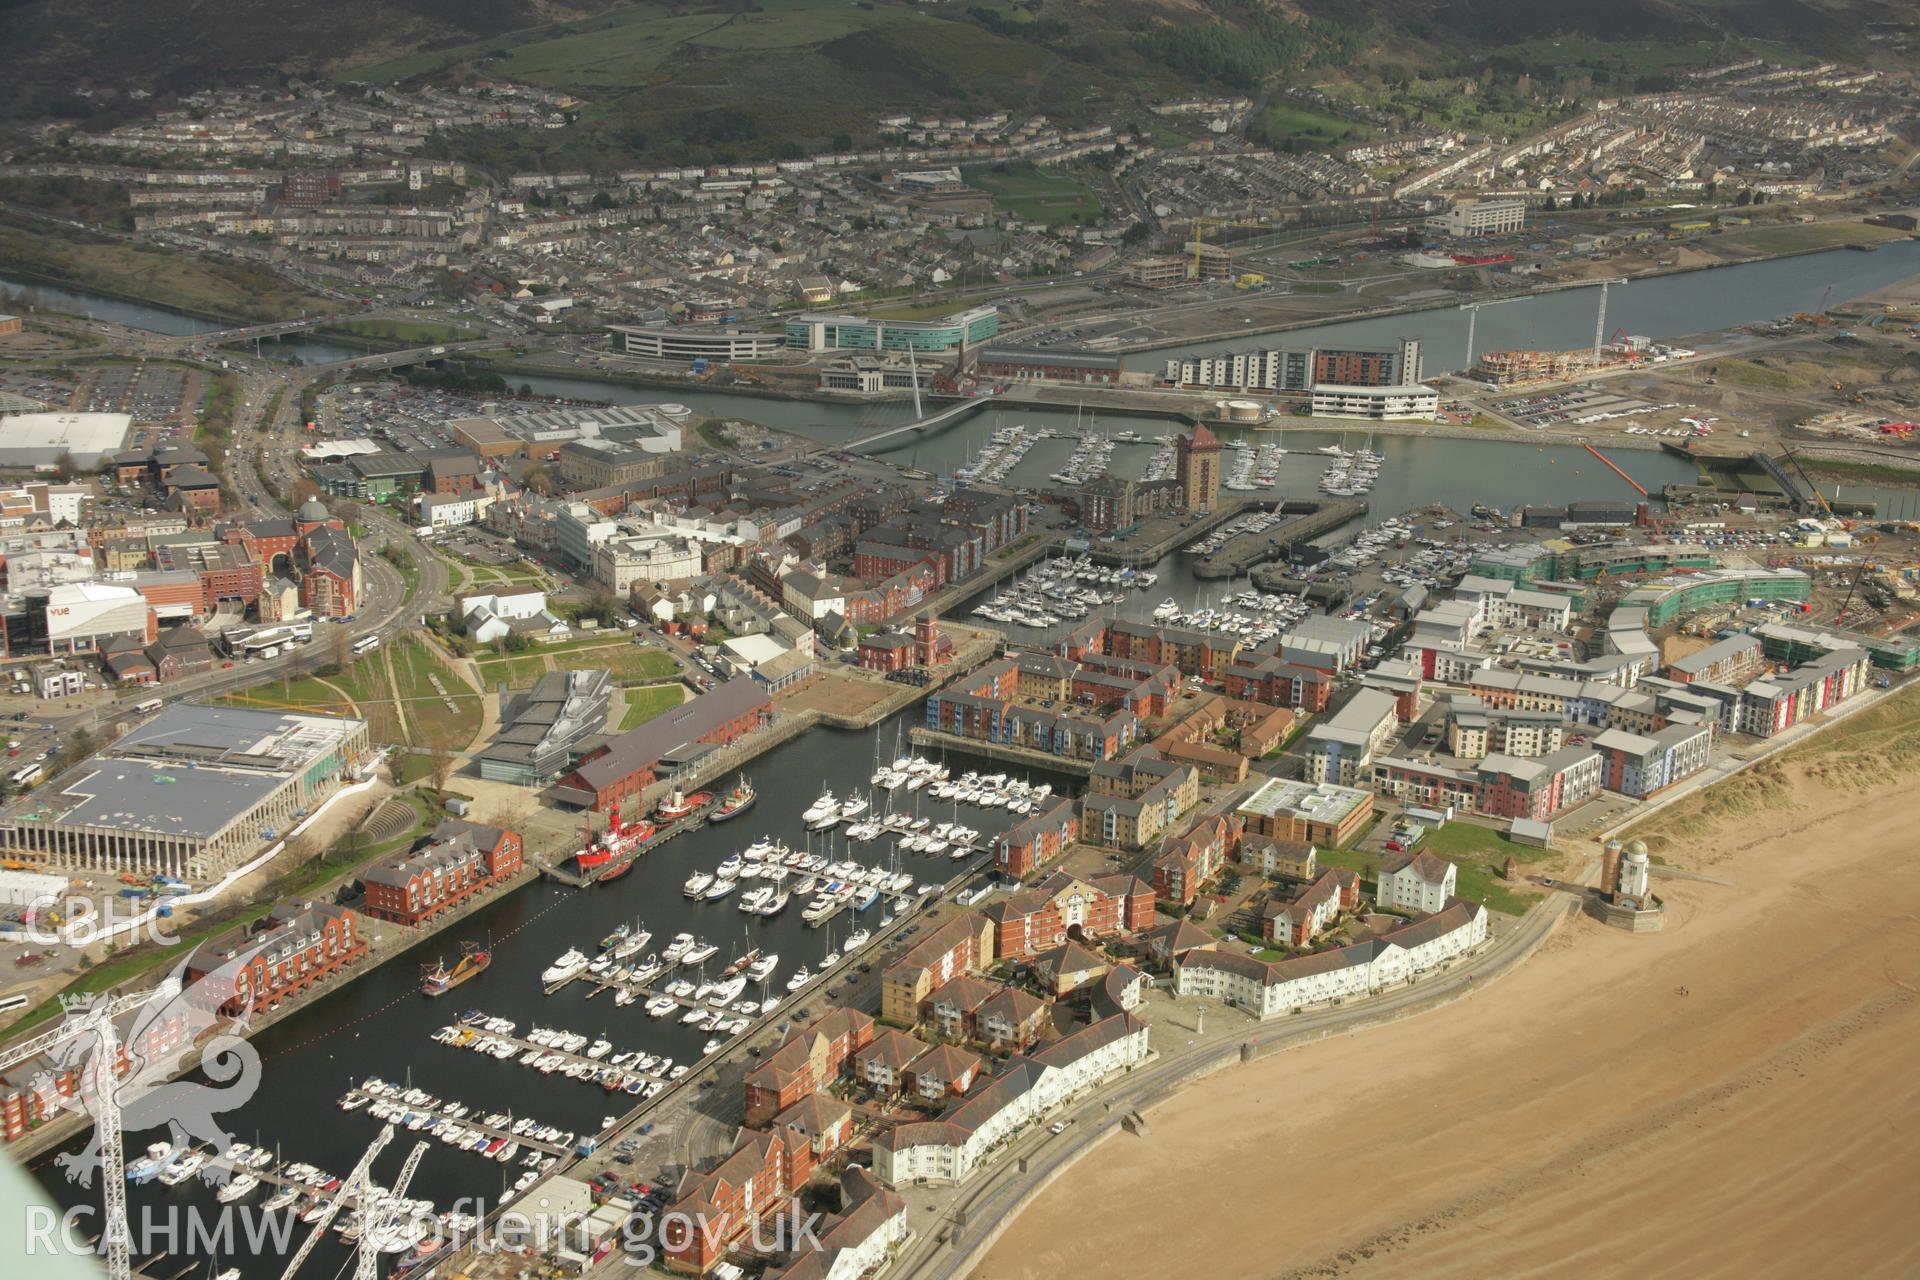 RCAHMW colour oblique aerial photograph of South Dock, now Swansea Marina. Taken on 16 March 2007 by Toby Driver